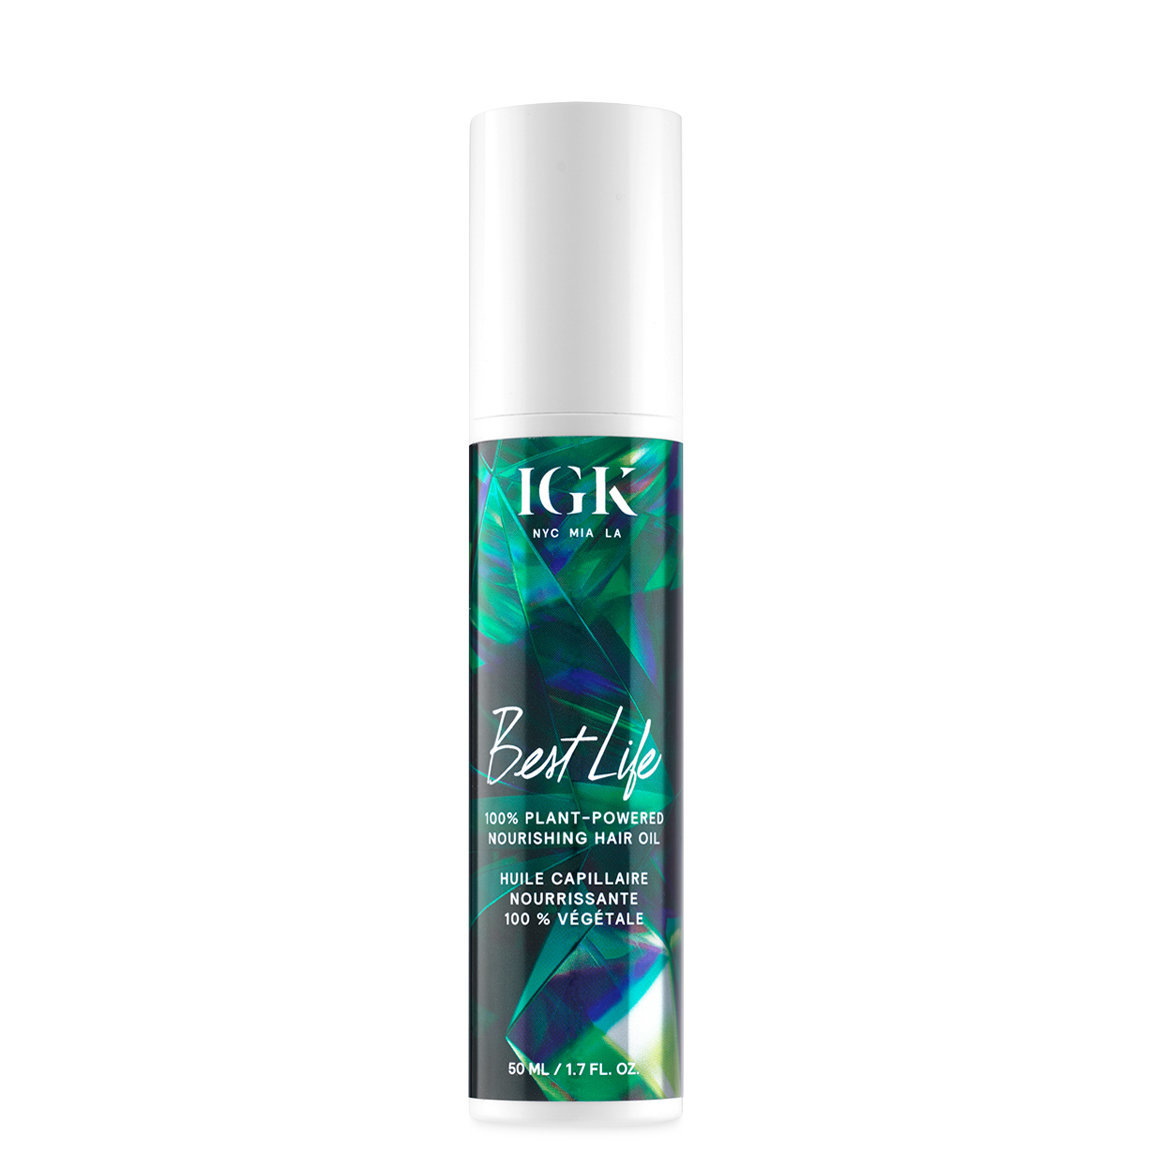 IGK Best Life Dream Hair Oil alternative view 1 - product swatch.